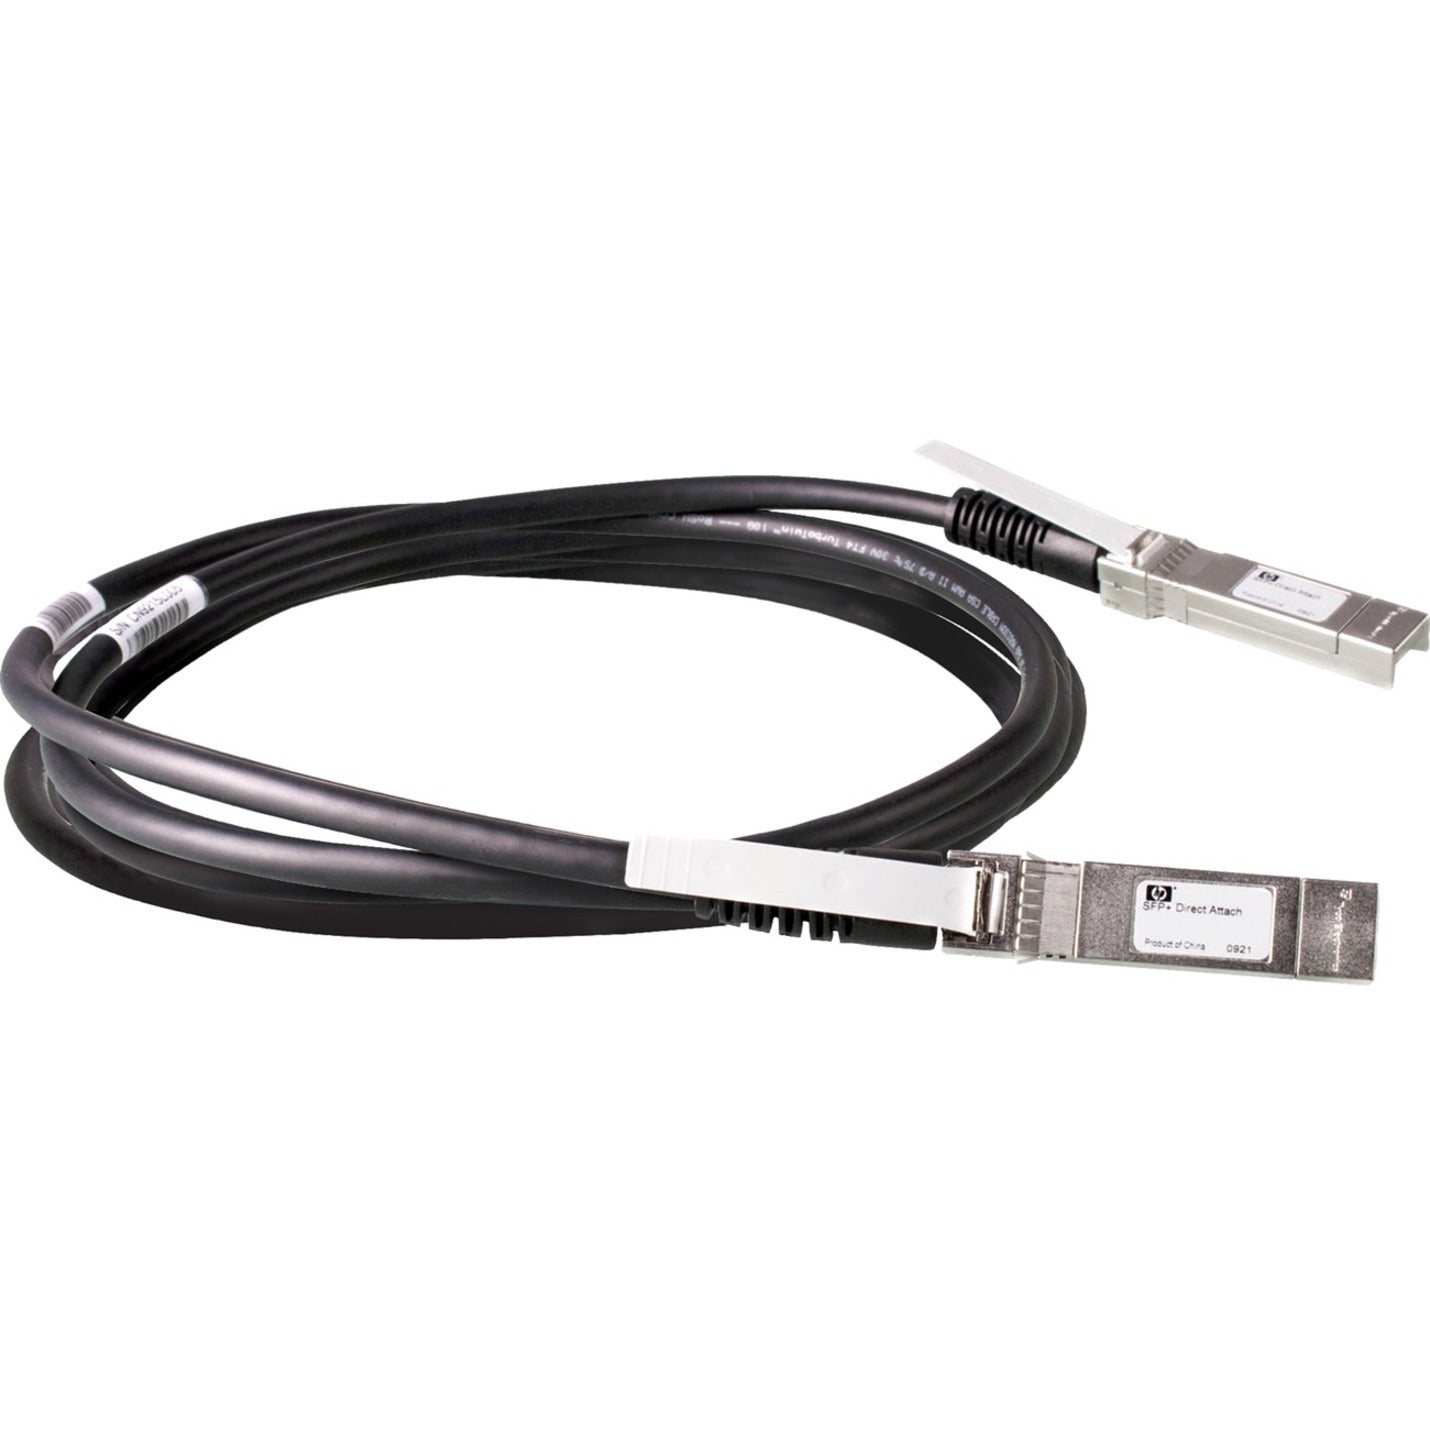 HPE 487655-B21 BLC SFP+ 10GBE Cable，9.84ft，黑色